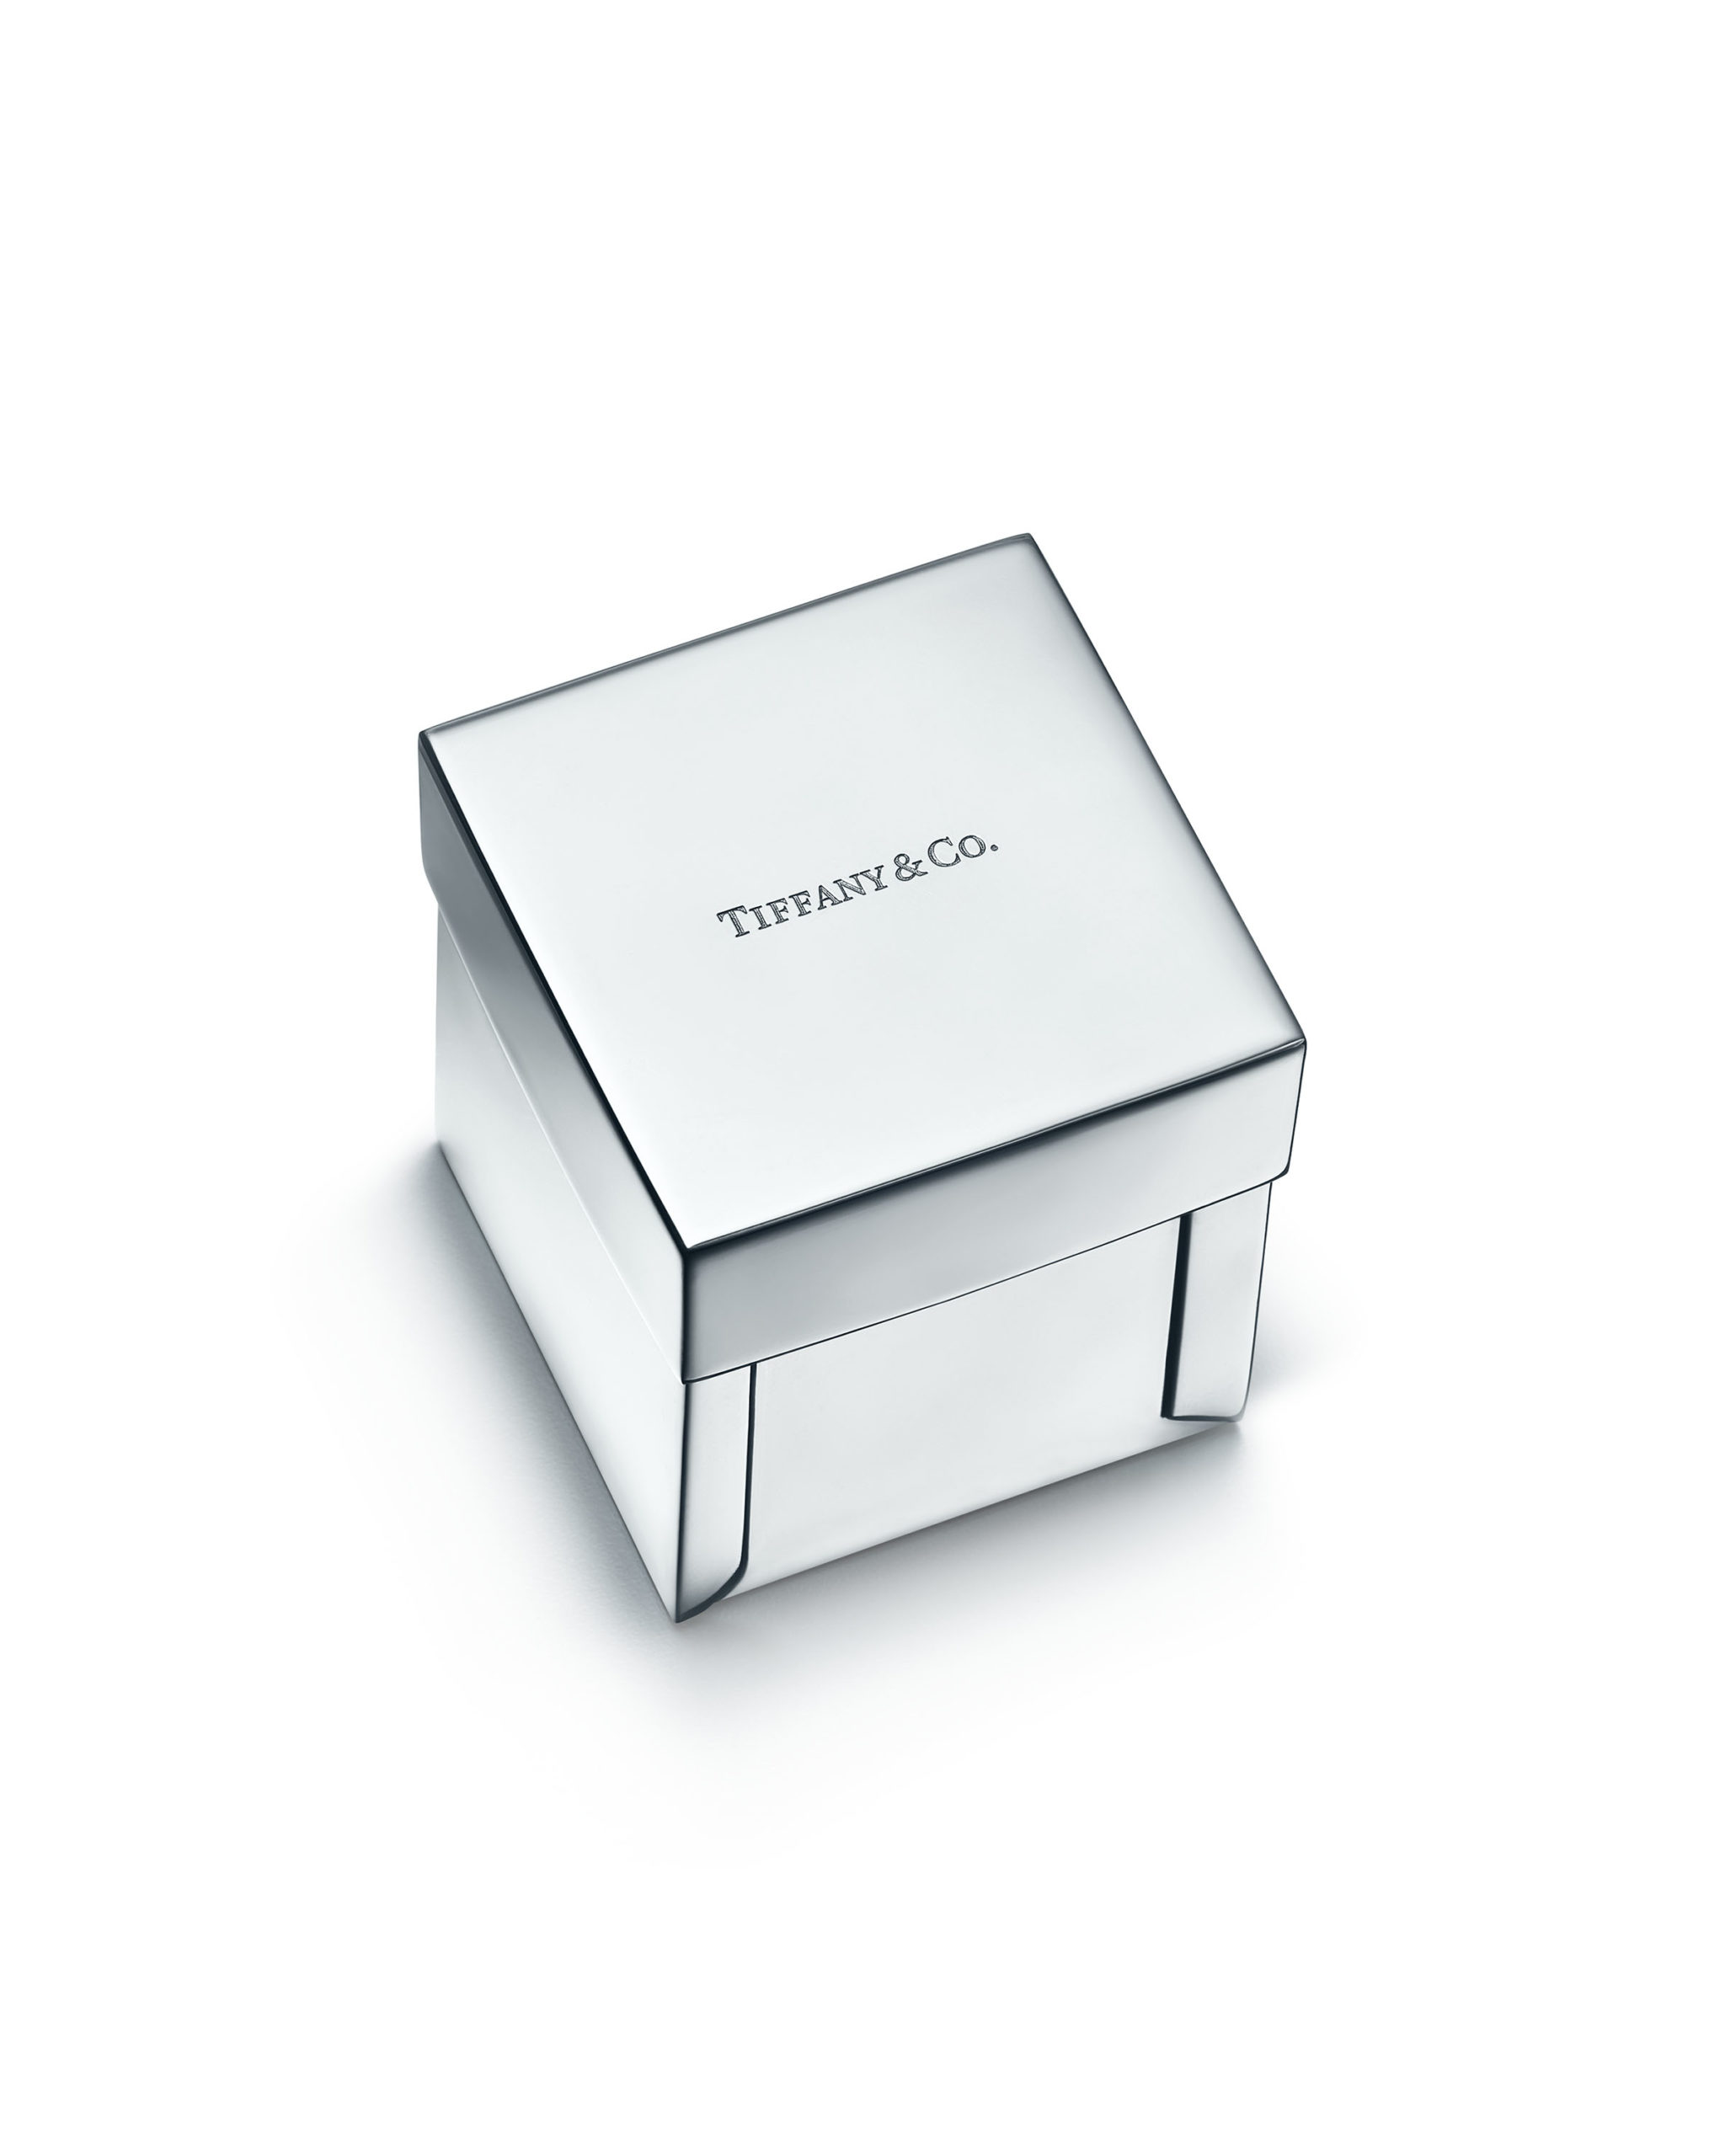 https://press.tiffany.com/wp-content/uploads/everyday-objects-tiffany-box-in-sterling-silver-with-tiffany-blue-enamel-accent-scaled.jpg